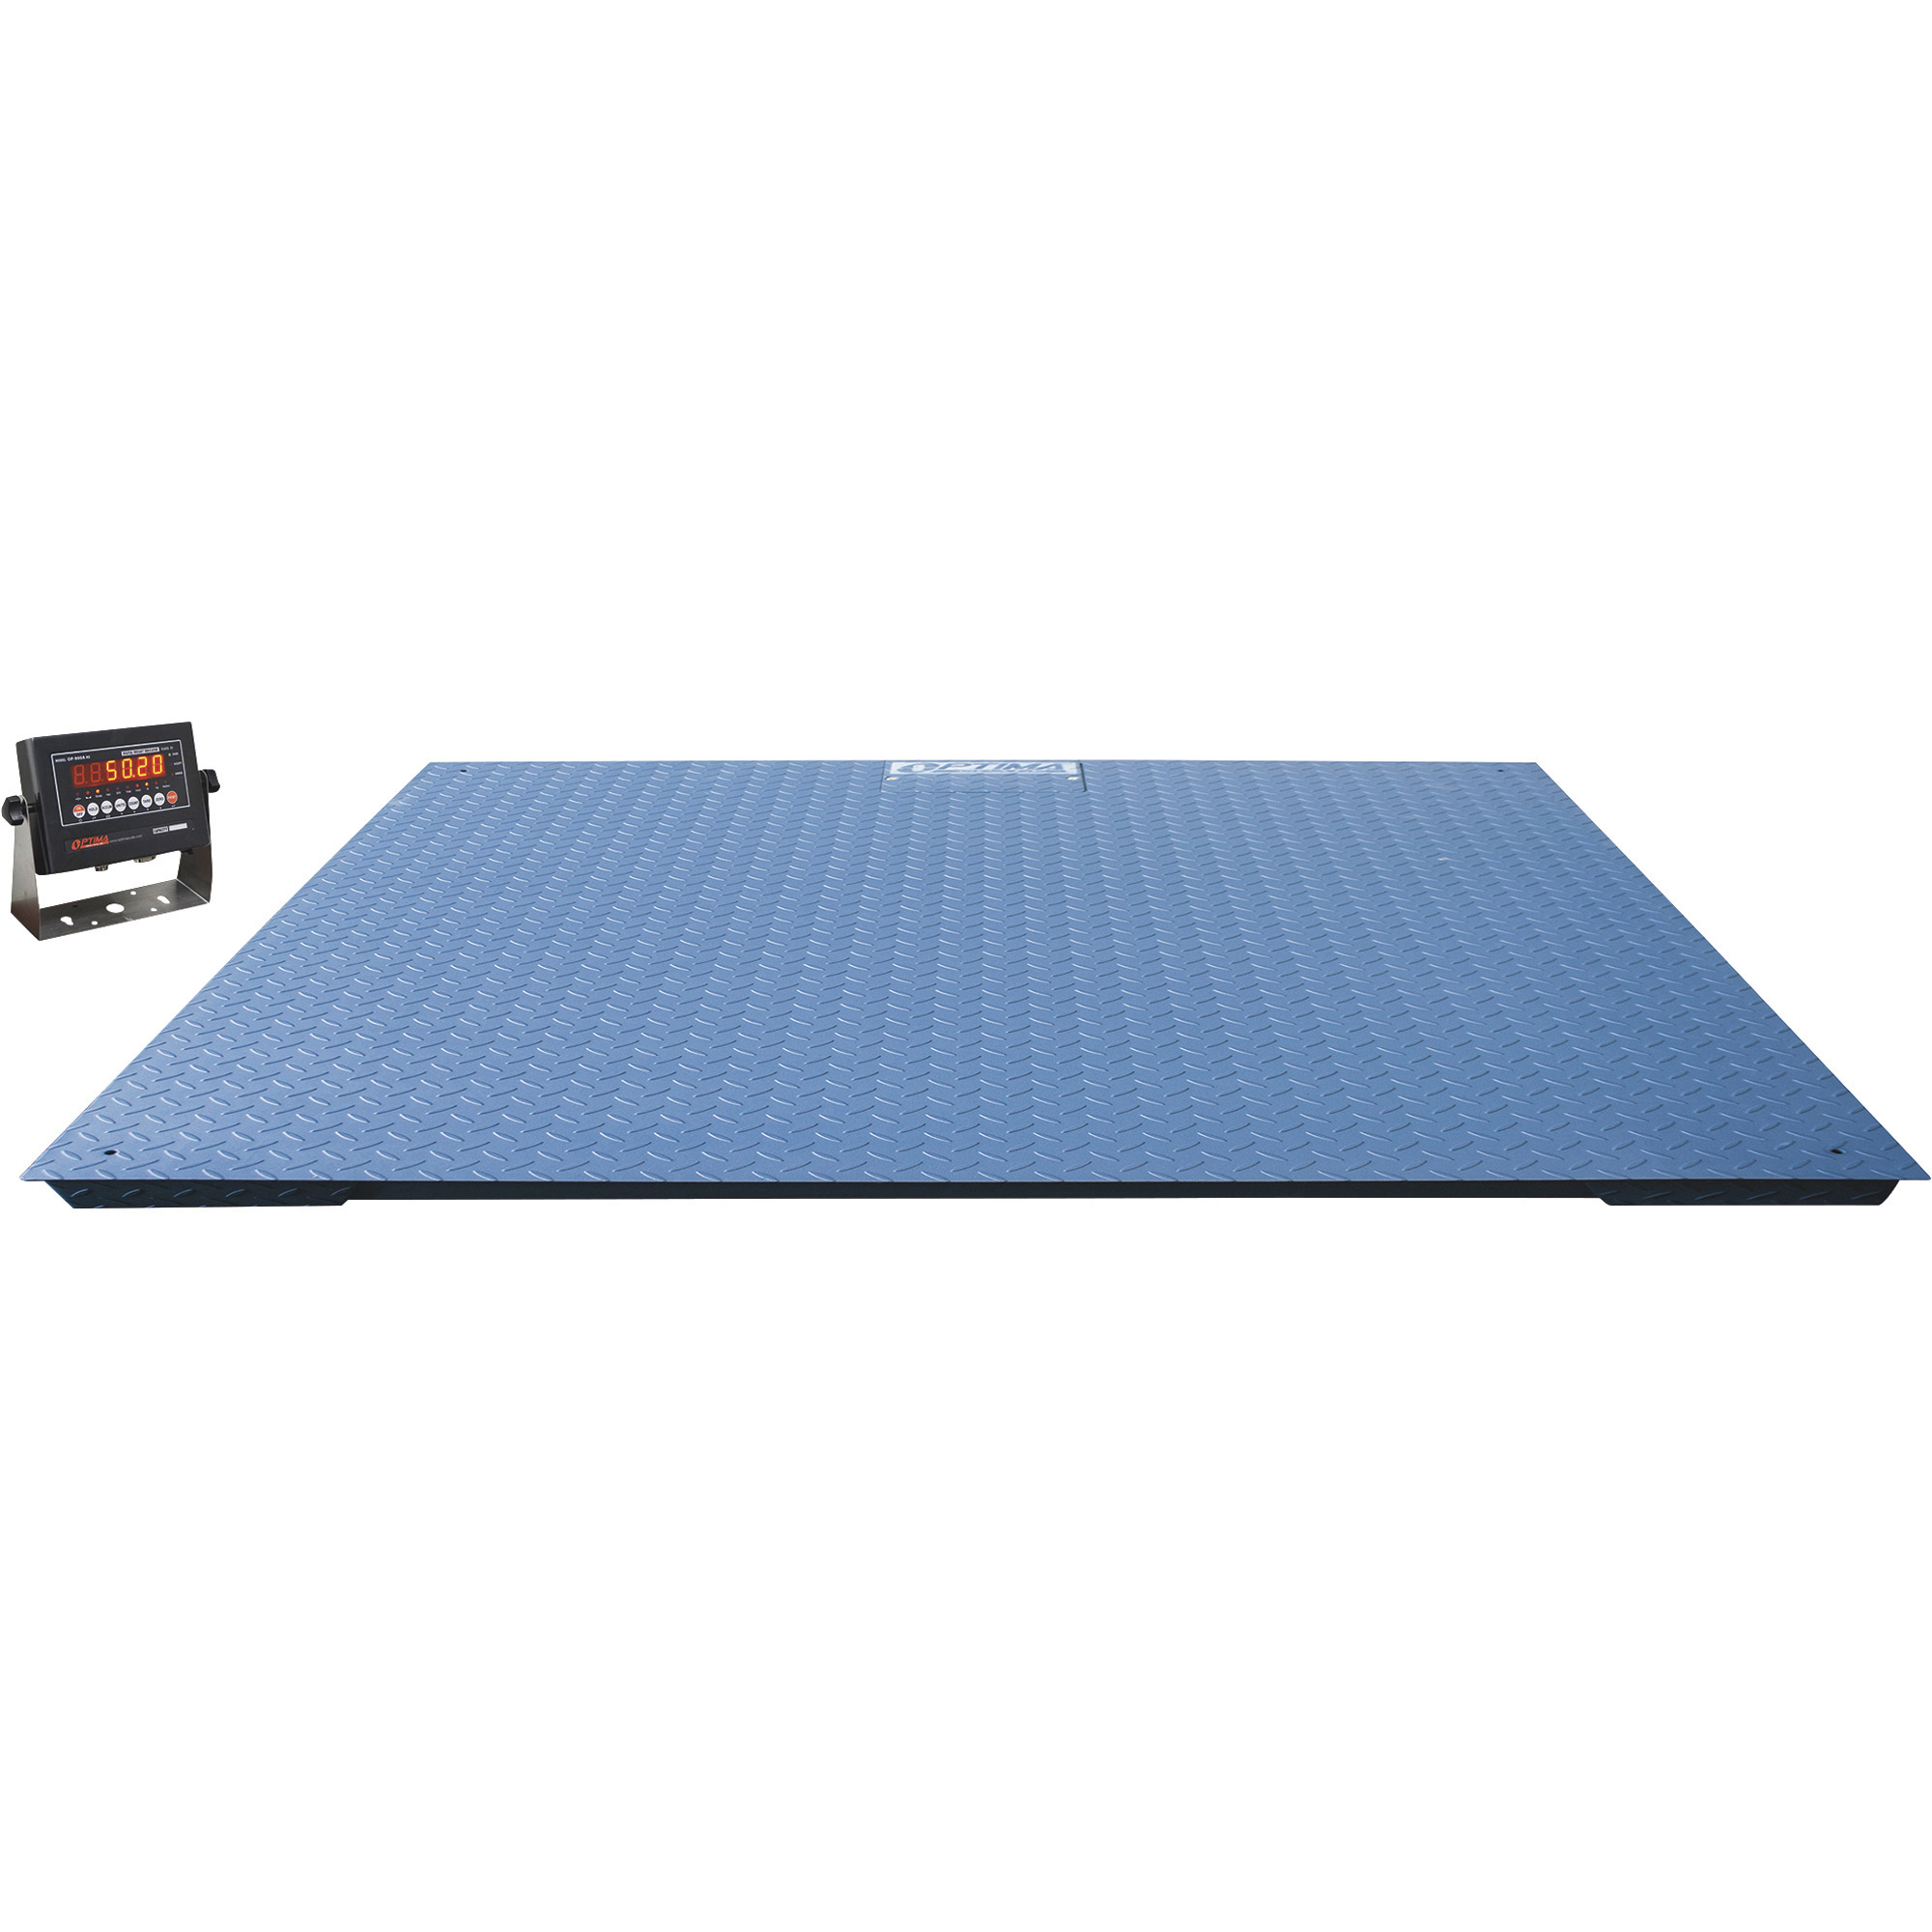 Optima Scale 96Inch x 48Inch Industrial Floor Scale — 5000-Lb. Weight Capacity, 1-lb. Display Increments, Model OP-916-4X8-5K -  OptimaScale